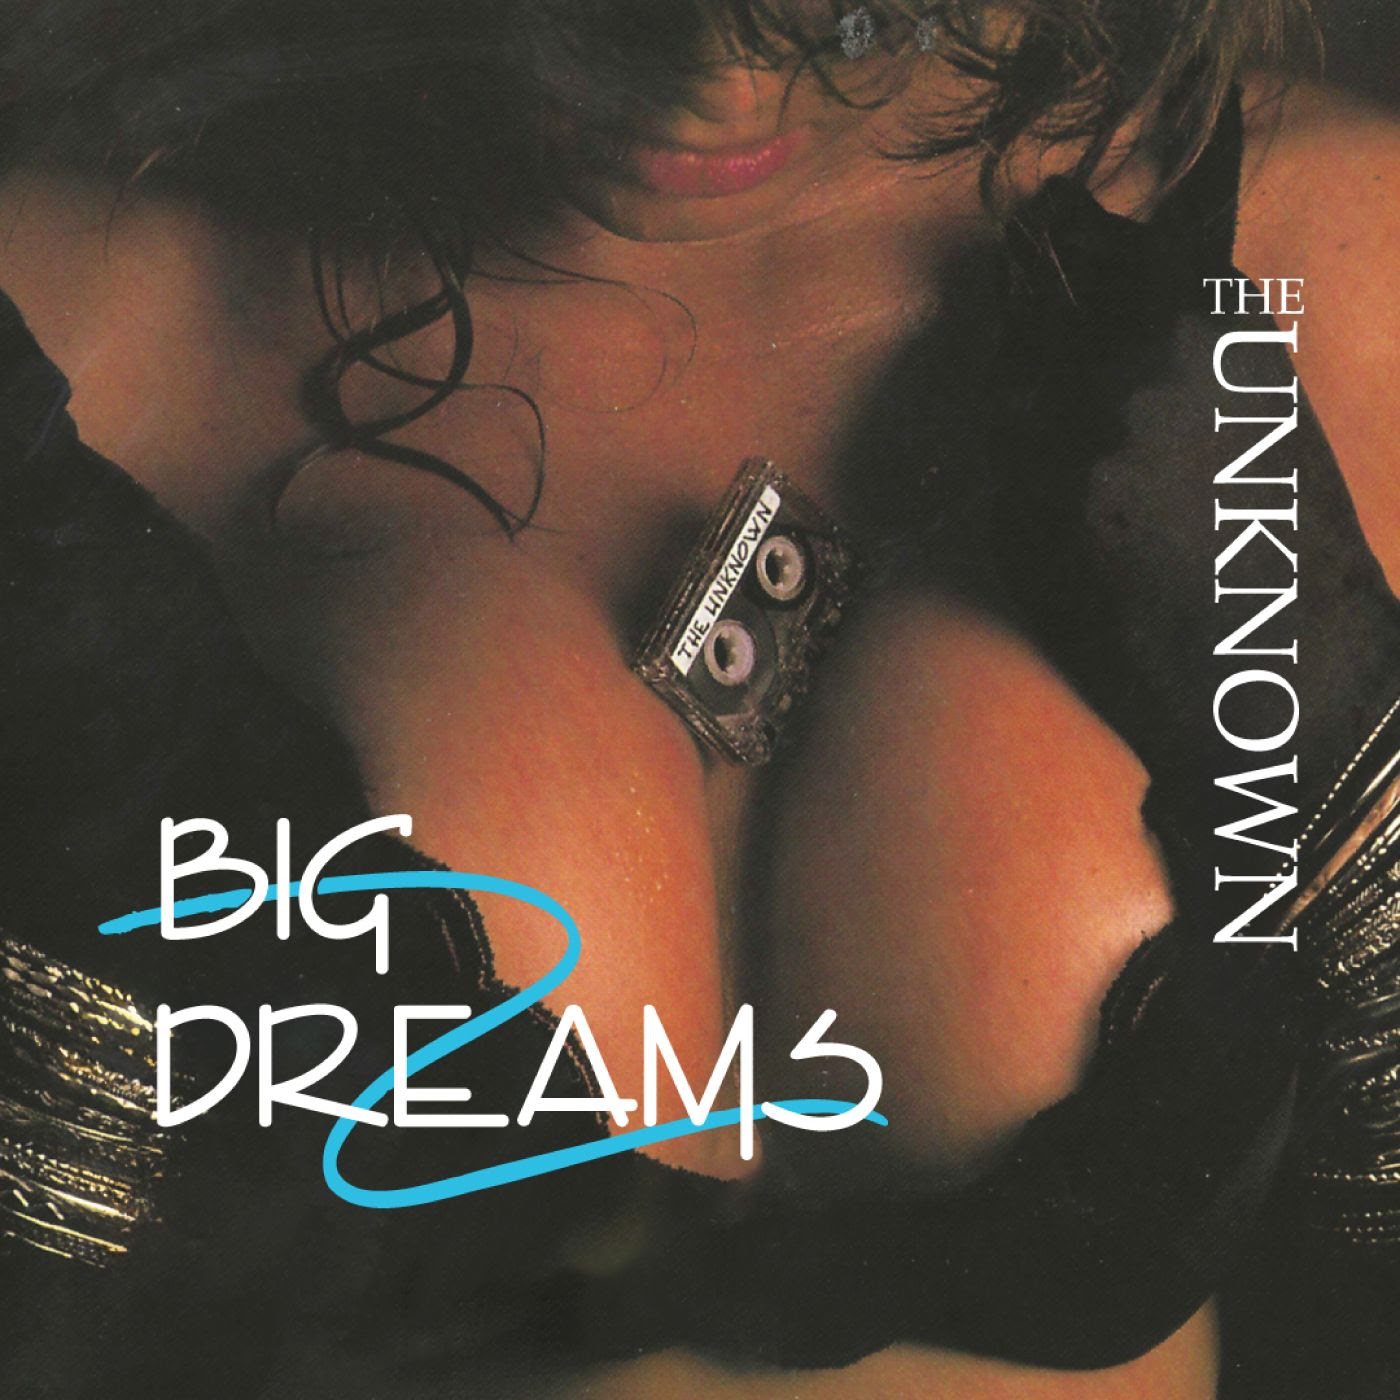 The Unknown (Big Dreams) - Pure AOR Magic from the 80’s sees a release via FnA Records